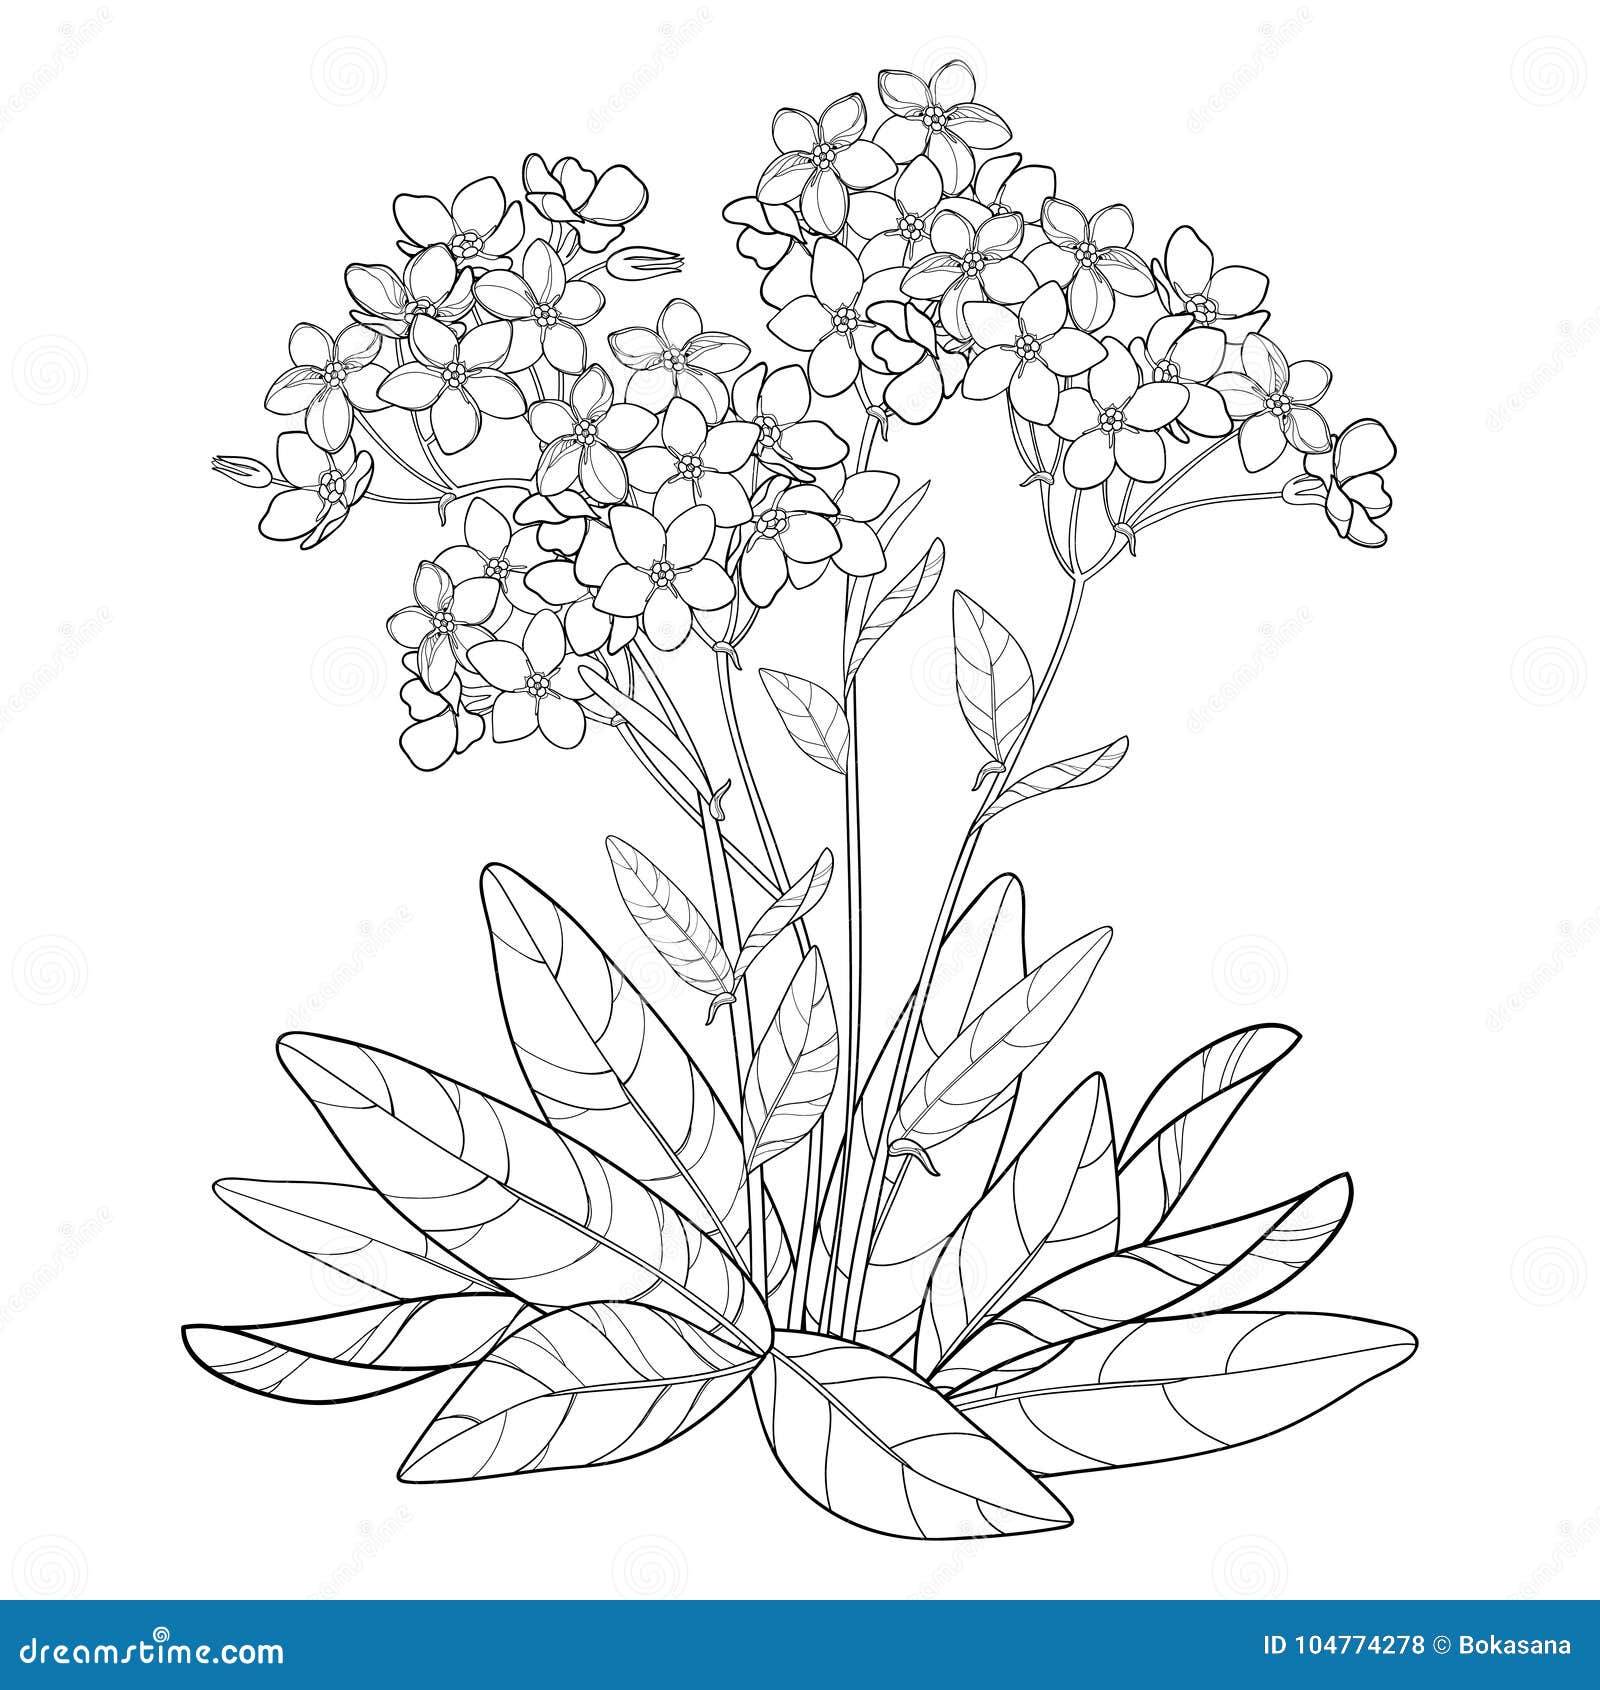  bouquet with outline forget me not or myosotis flower, bunch, bud and leaves in black  on white background.